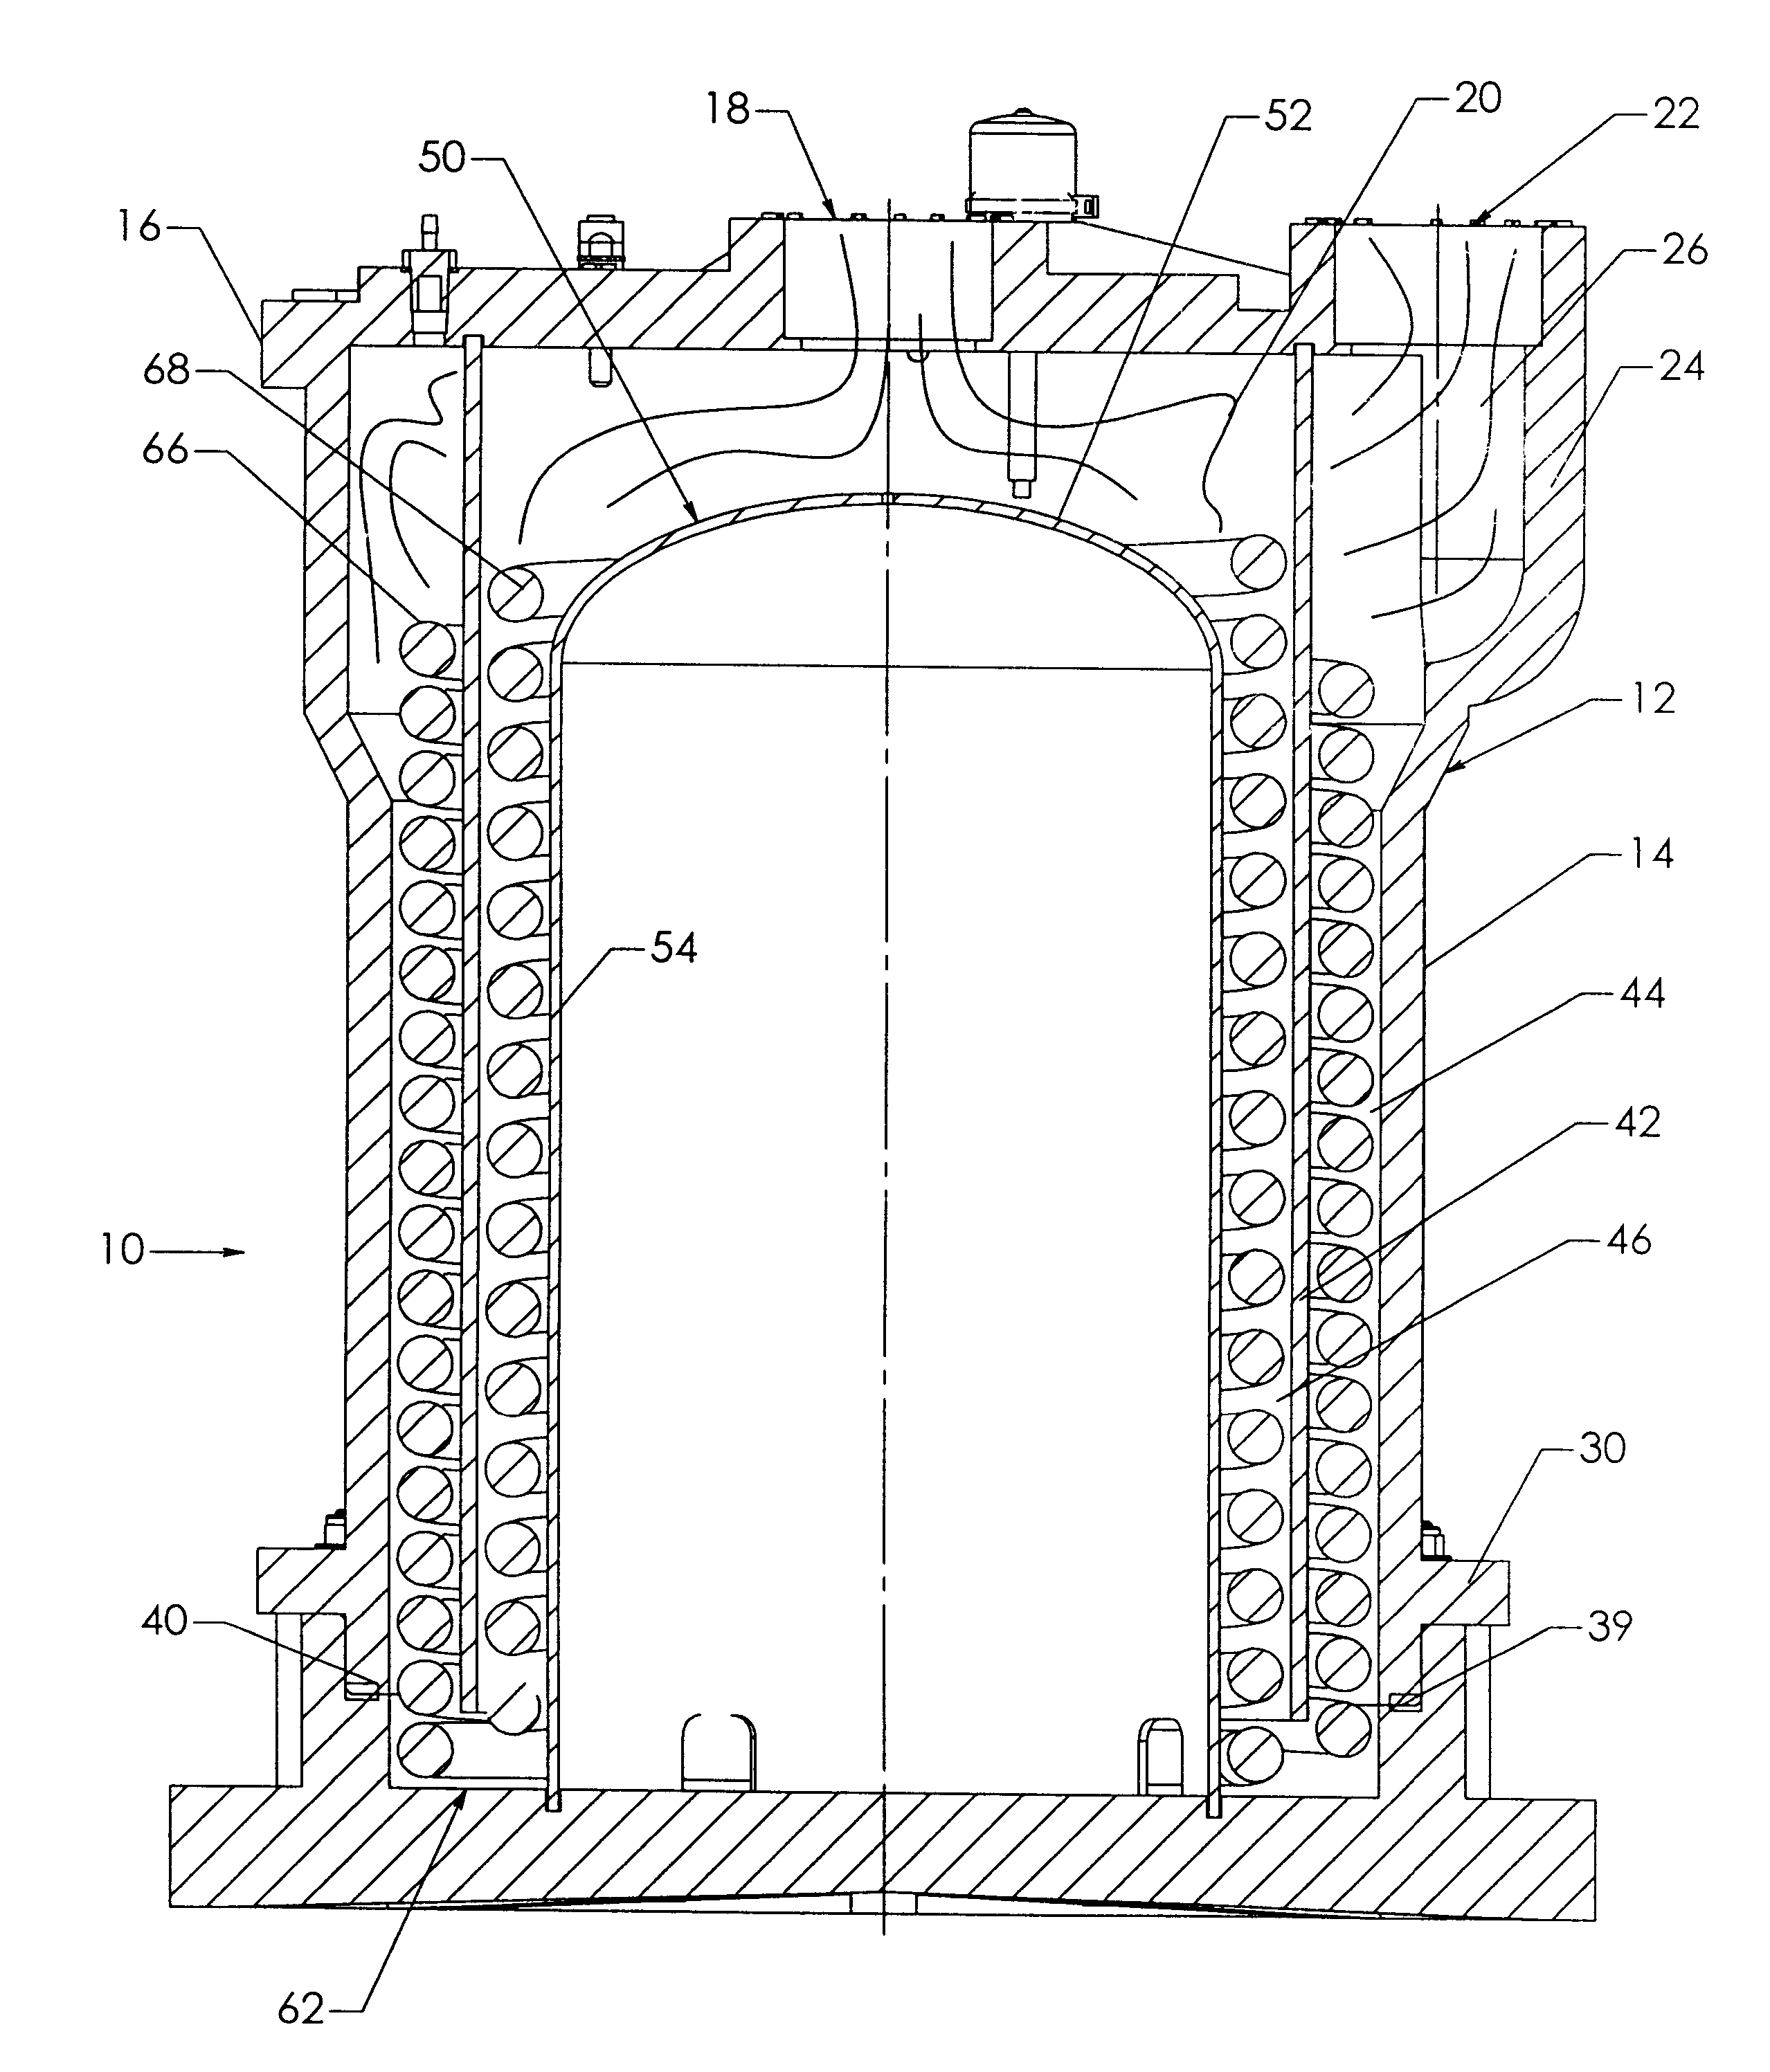 Heat exchanger with two-stage heat transfer